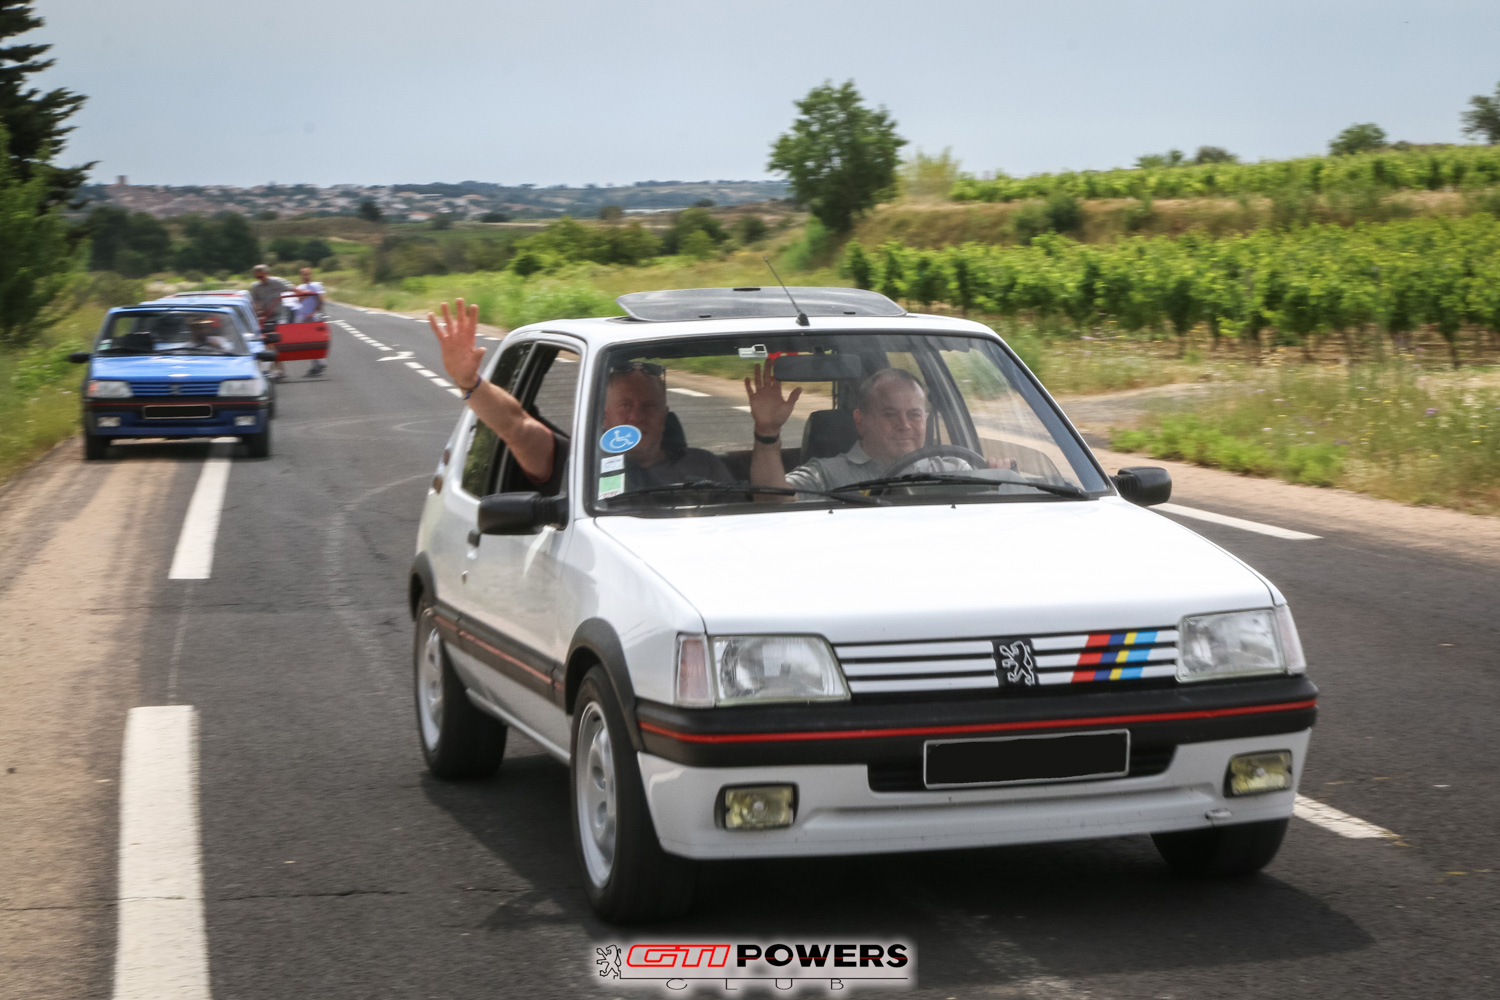 [GTIPOWERS DAYS] Nationale #4 - 8-9-10 Juin 2019 - Beziers - Page 8 Gtipow77